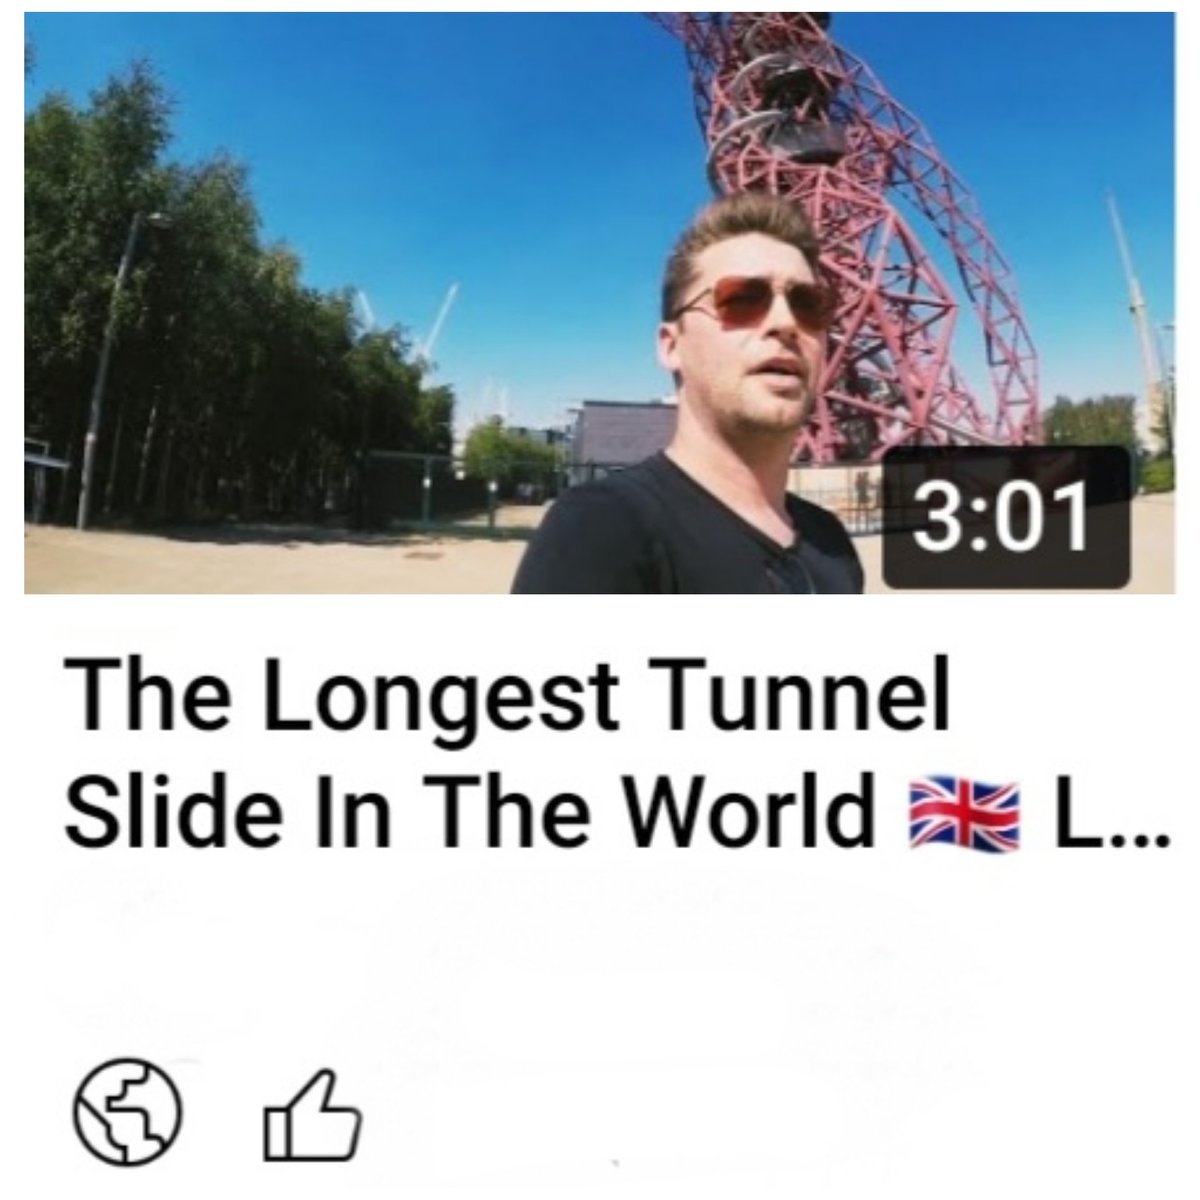 Whether Your Looking For Things To Do Or Sitting On The Toilet Enjoy #backtothebeginning #londonvlog #londonvlogger #londonduringcovid19 #covidlondon #exploringlondon #mylondon #secretlondon #hiddenlondon #youtubevlogger #theorbit #londontourguide #stratford #tunnelslide